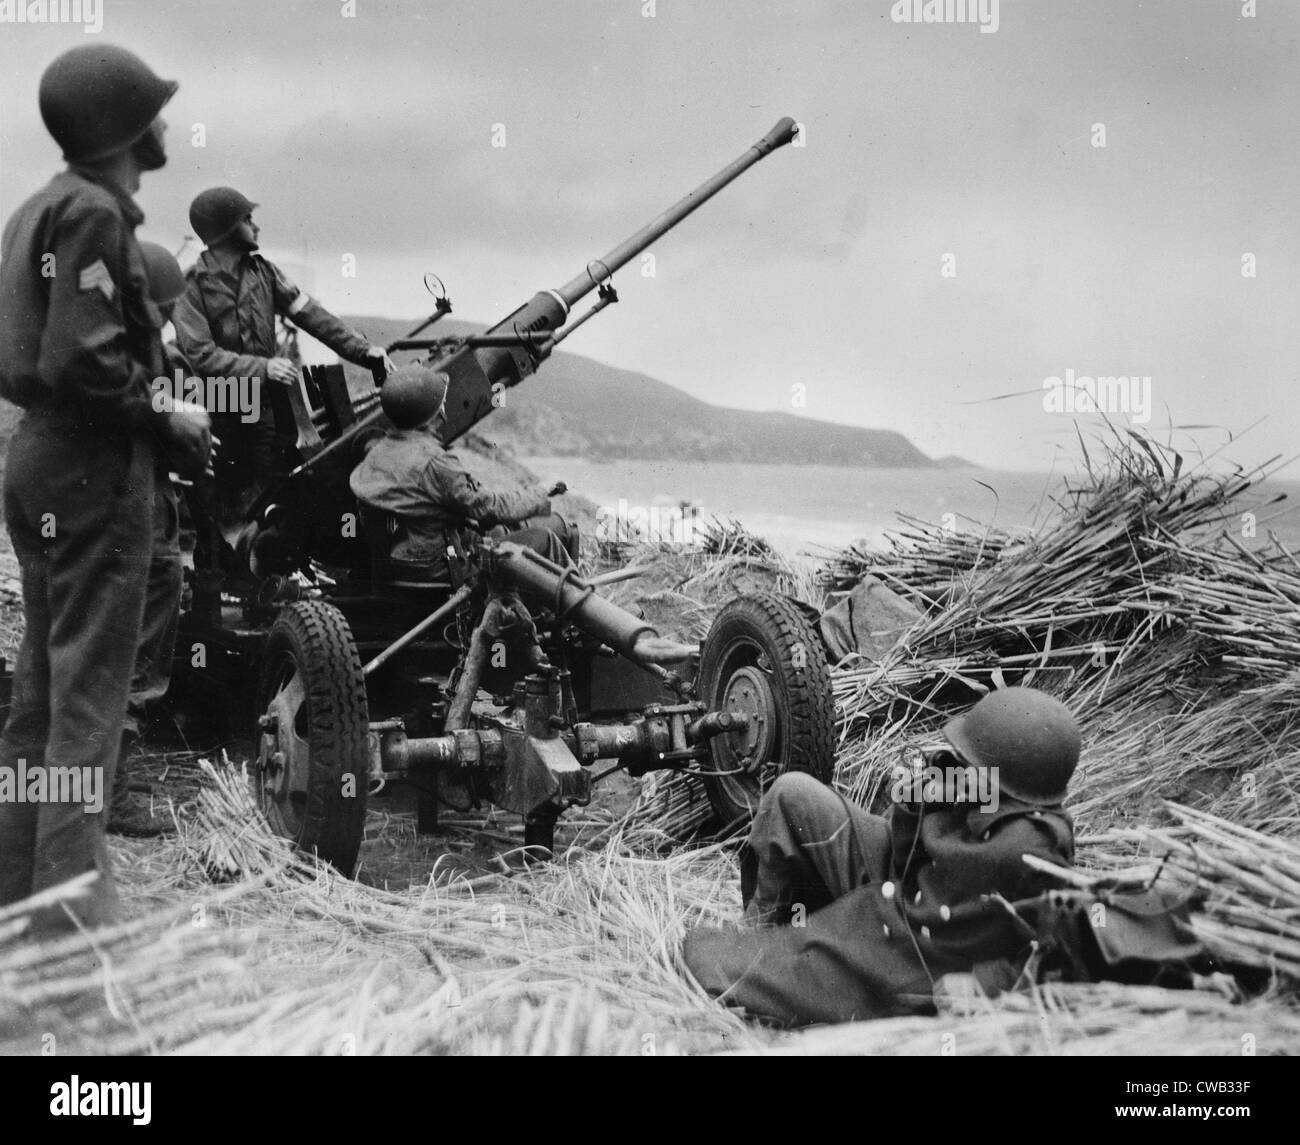 World War II, original caption: 'Anti-aircraft bofors gun in at position on a mound overlooking the beach in Algeria with a Stock Photo